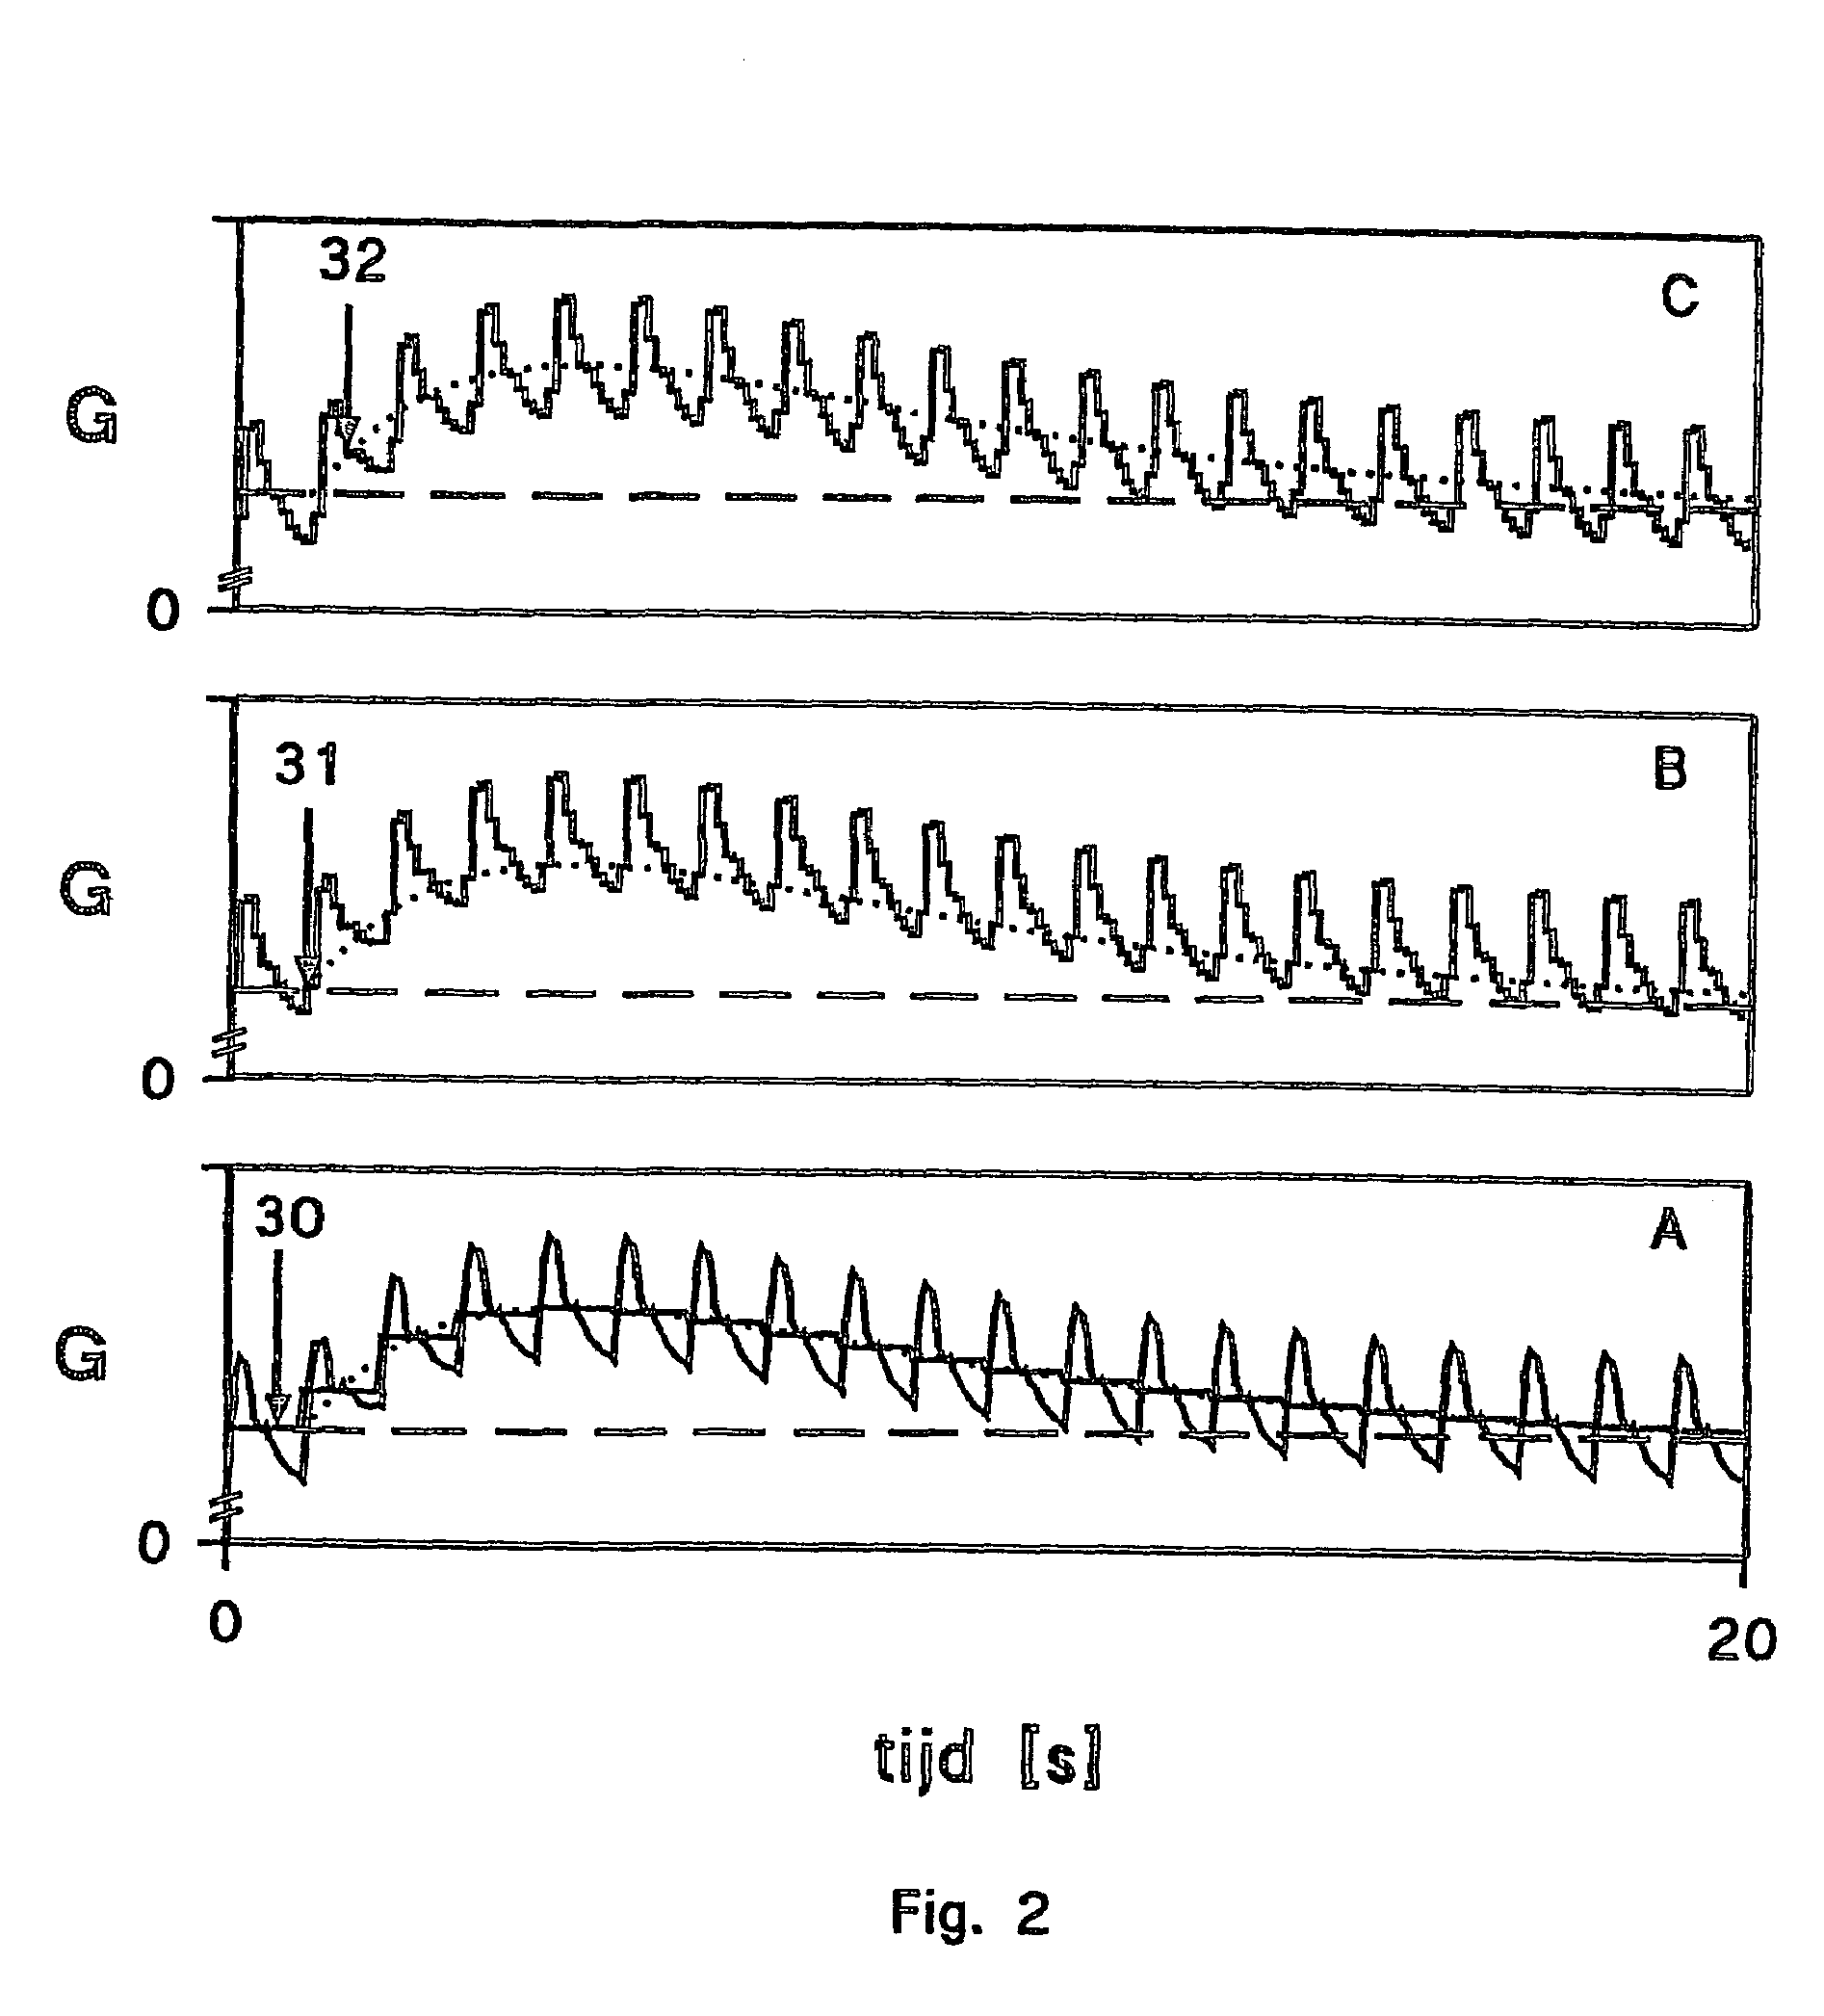 Method and device for determining the segmental volume and electrical parallel conductance of a cardiac chamber or blood vessel